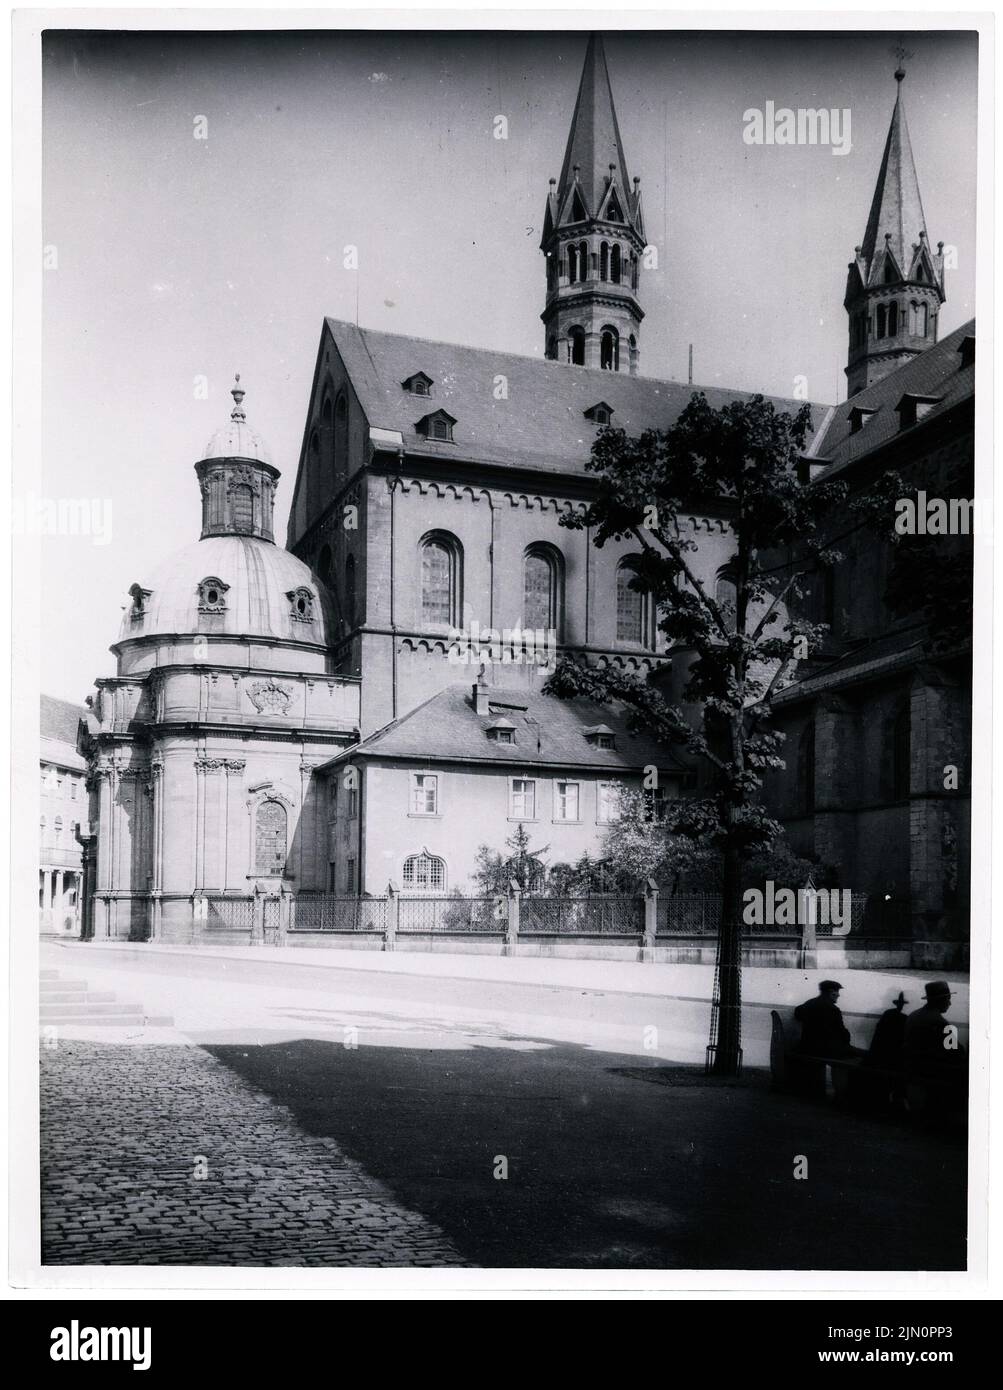 Grantzow Hans, Cathedral, Würzburg (without Dat.): Verrais and Schönbornkapelle from the outside. Photo, 24.3 x 18.7 cm (including scan edges) Grantzow Hans: Dom, Würzburg (ohne Dat.) Stock Photo